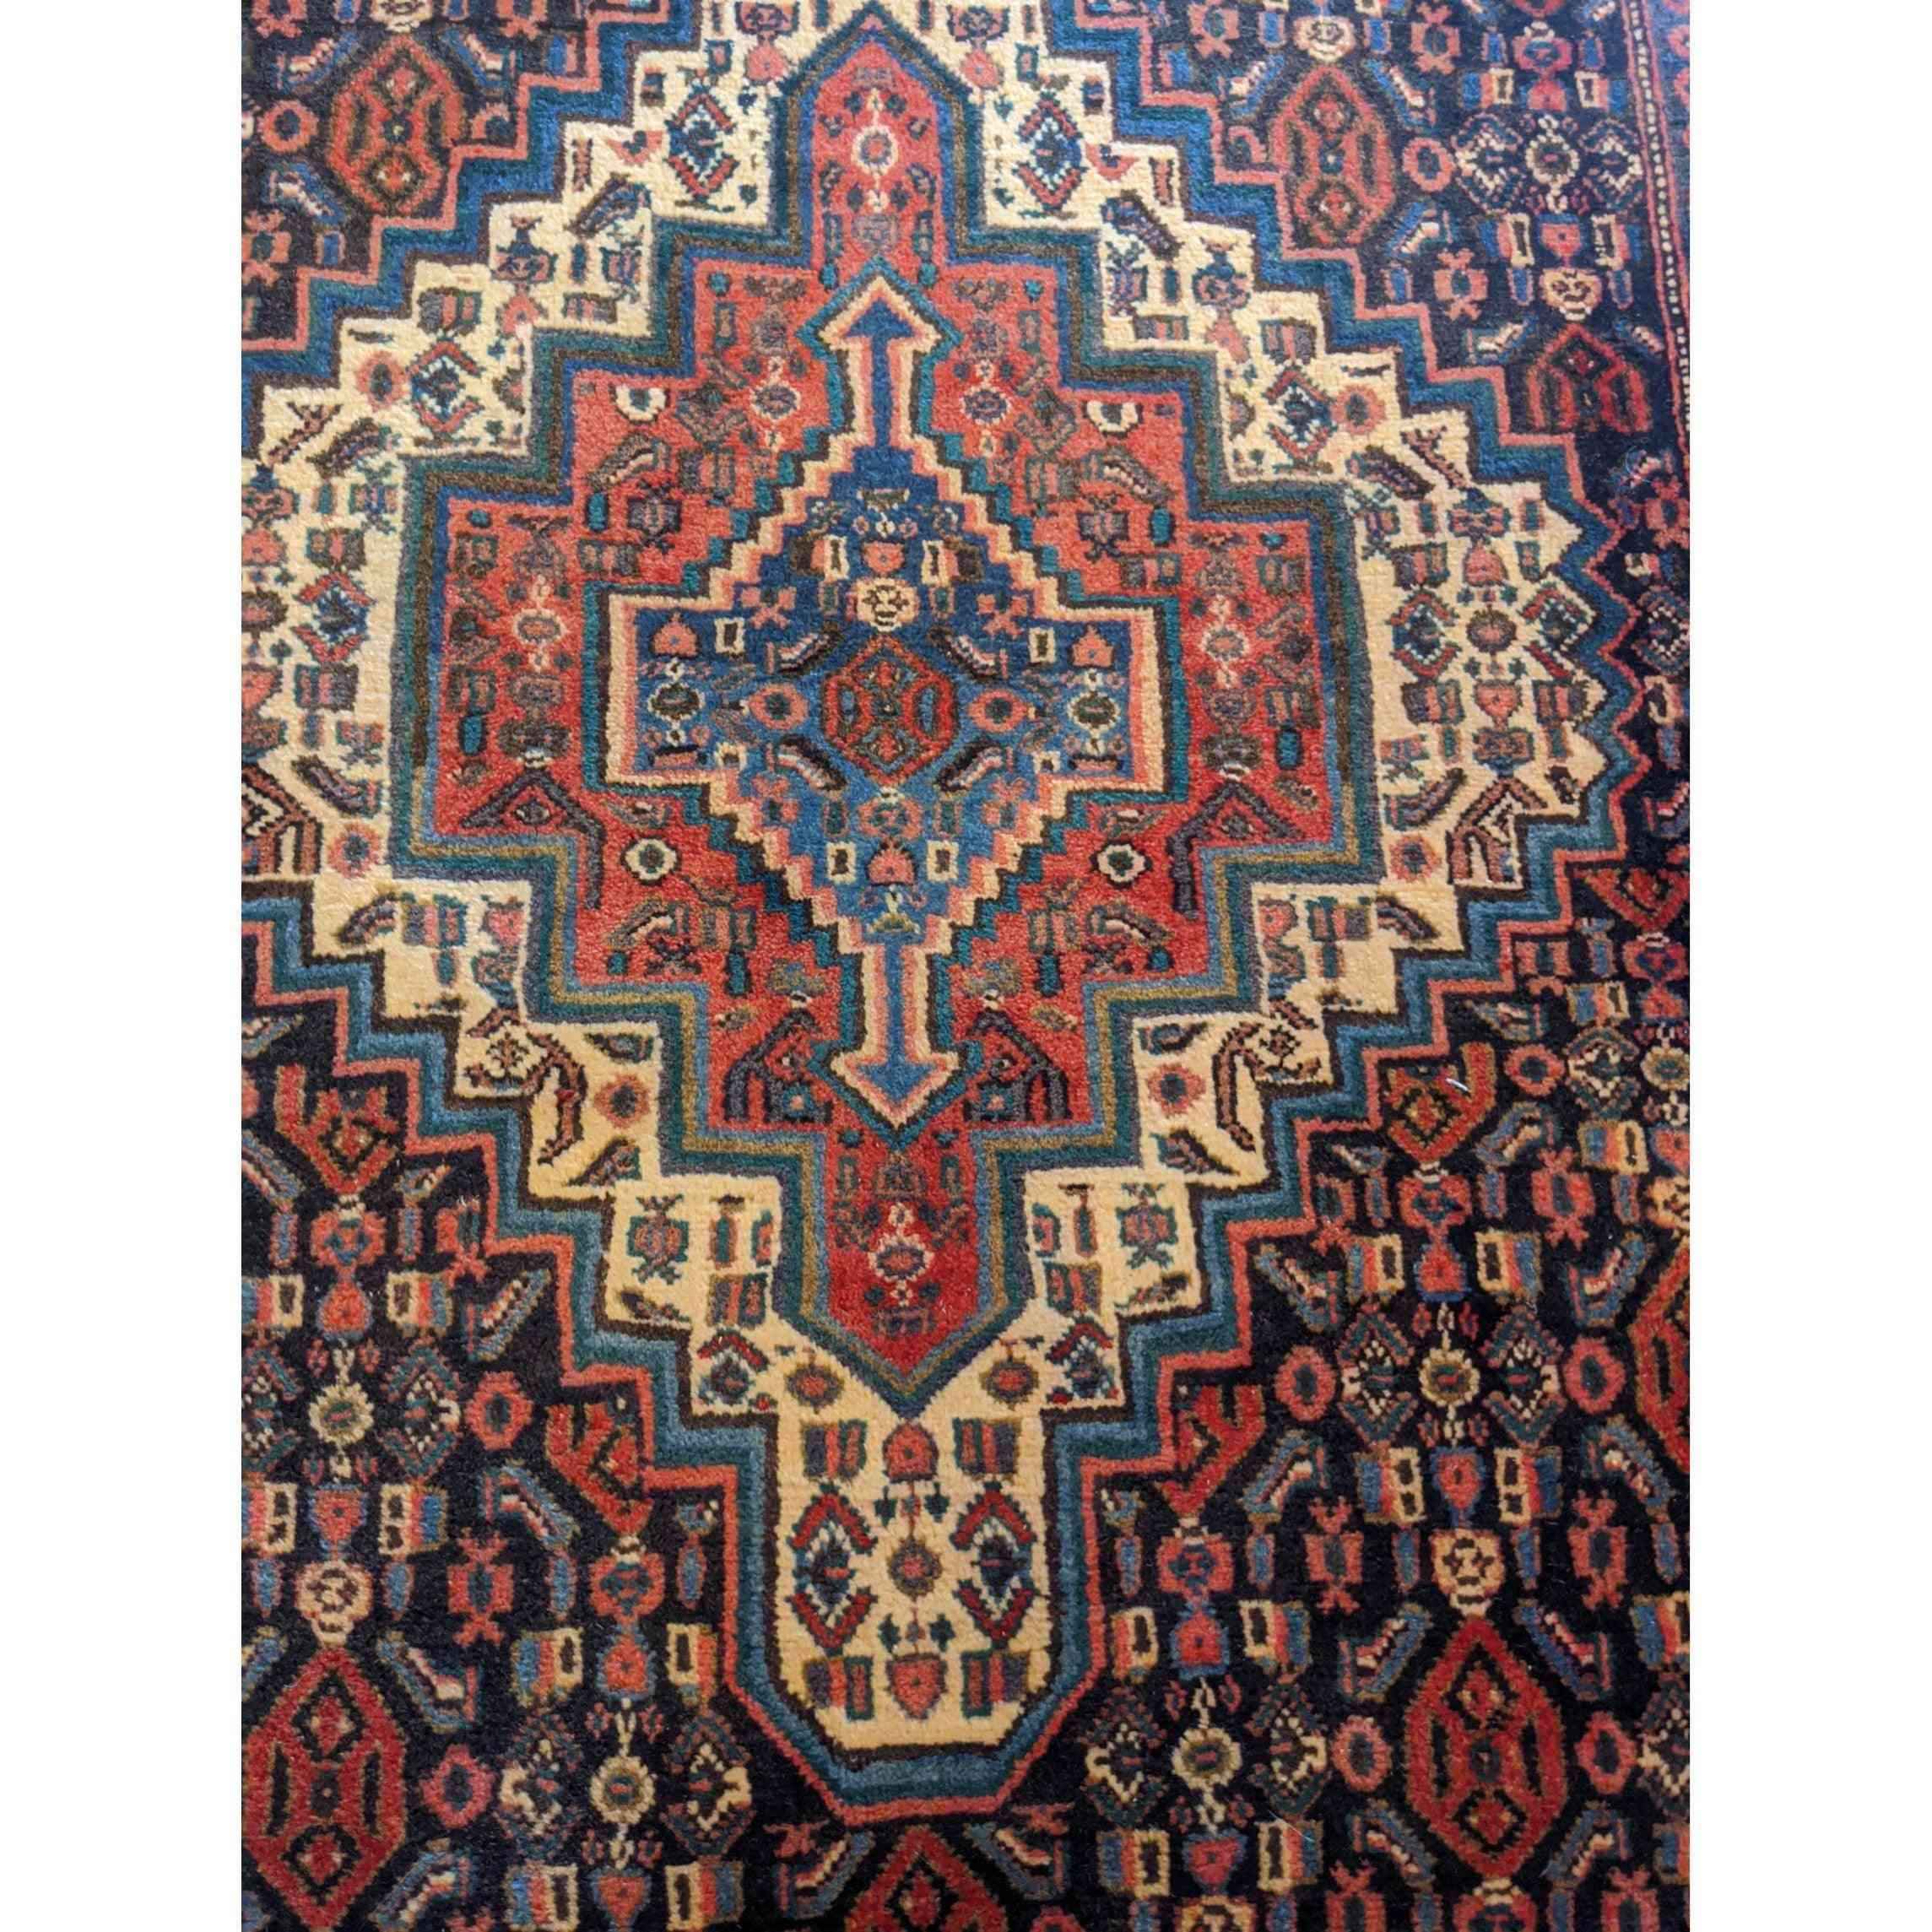 93 x 70 cm Persian Senneh Traditional Red Small Rug - Rugmaster